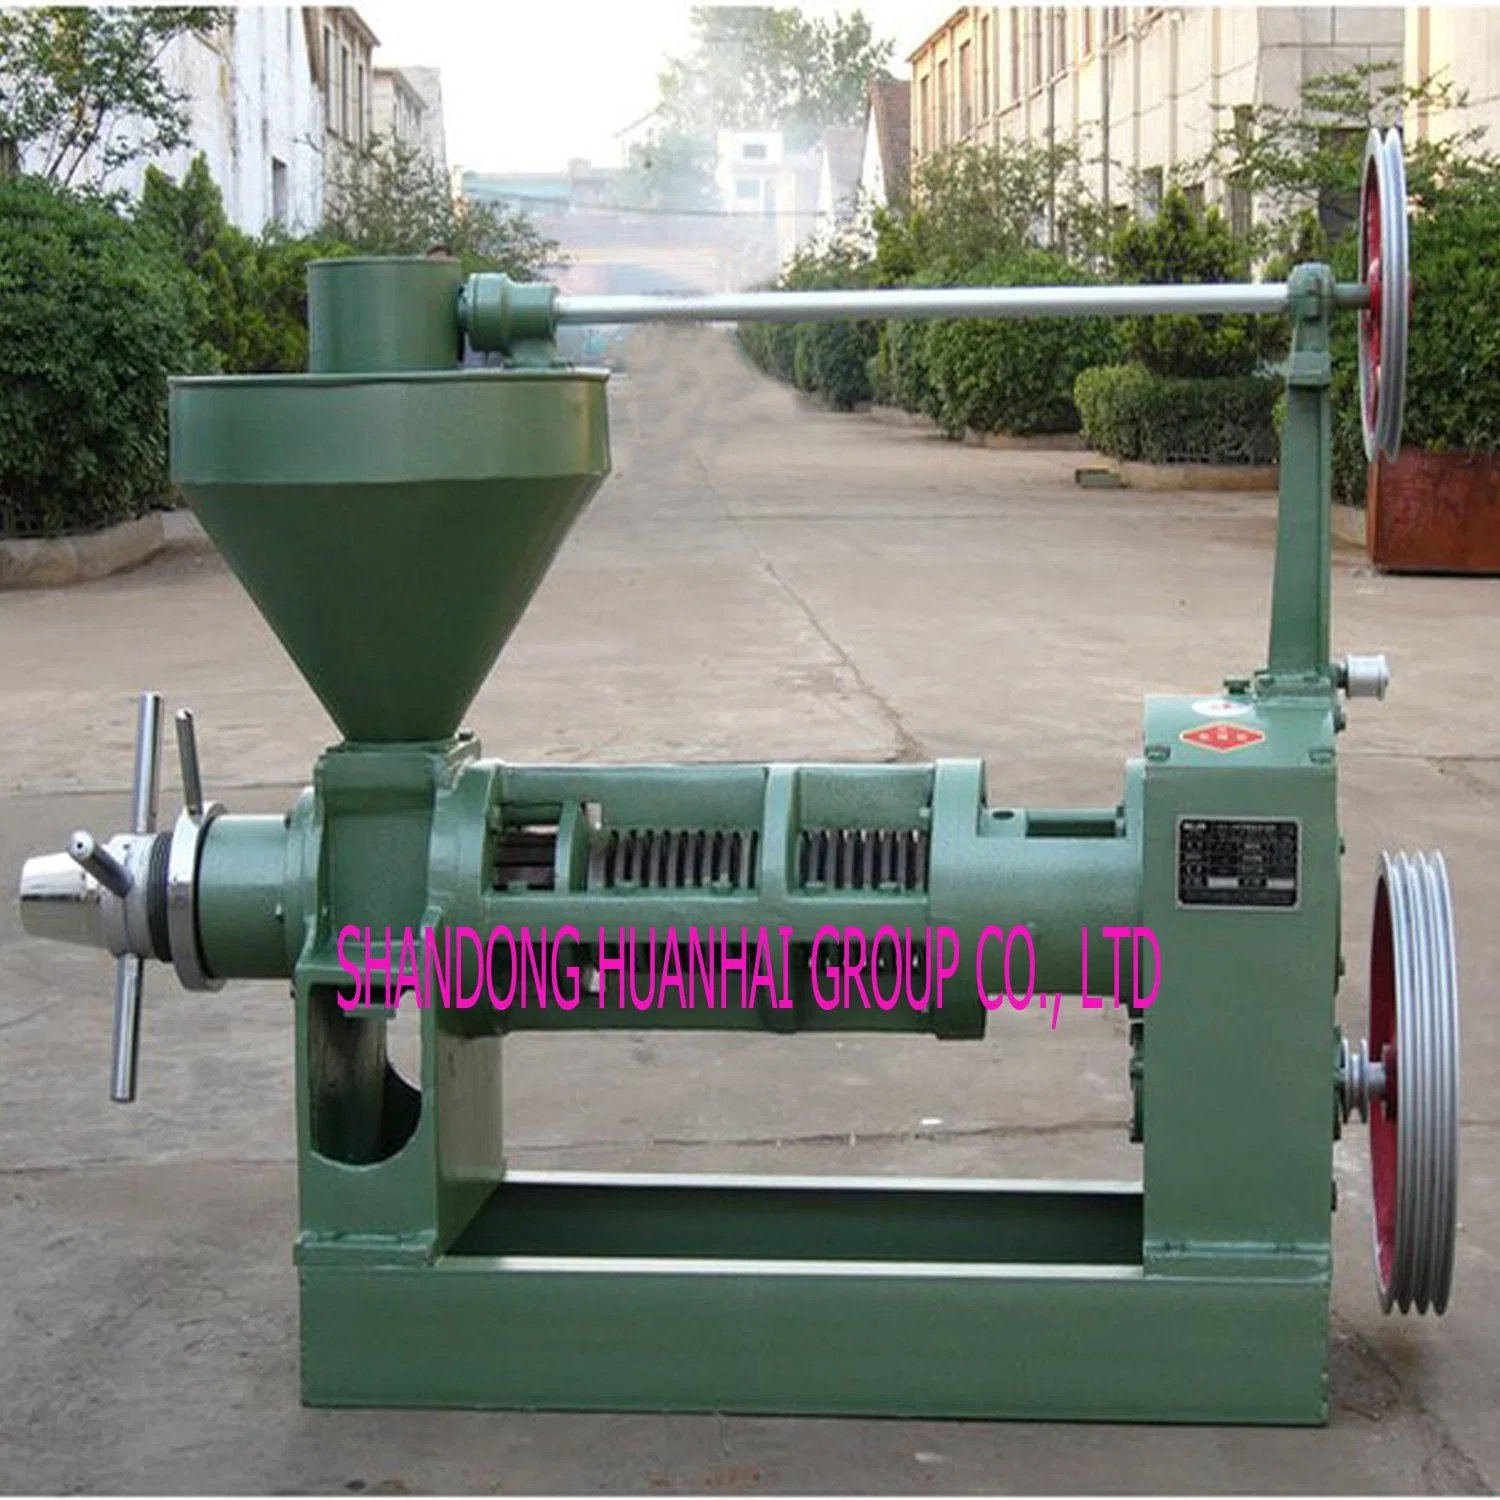 Yl100 Yl130 Yl160 Screw Type Oil Press for Peanuts Rapeseeds Sunflower Seeds